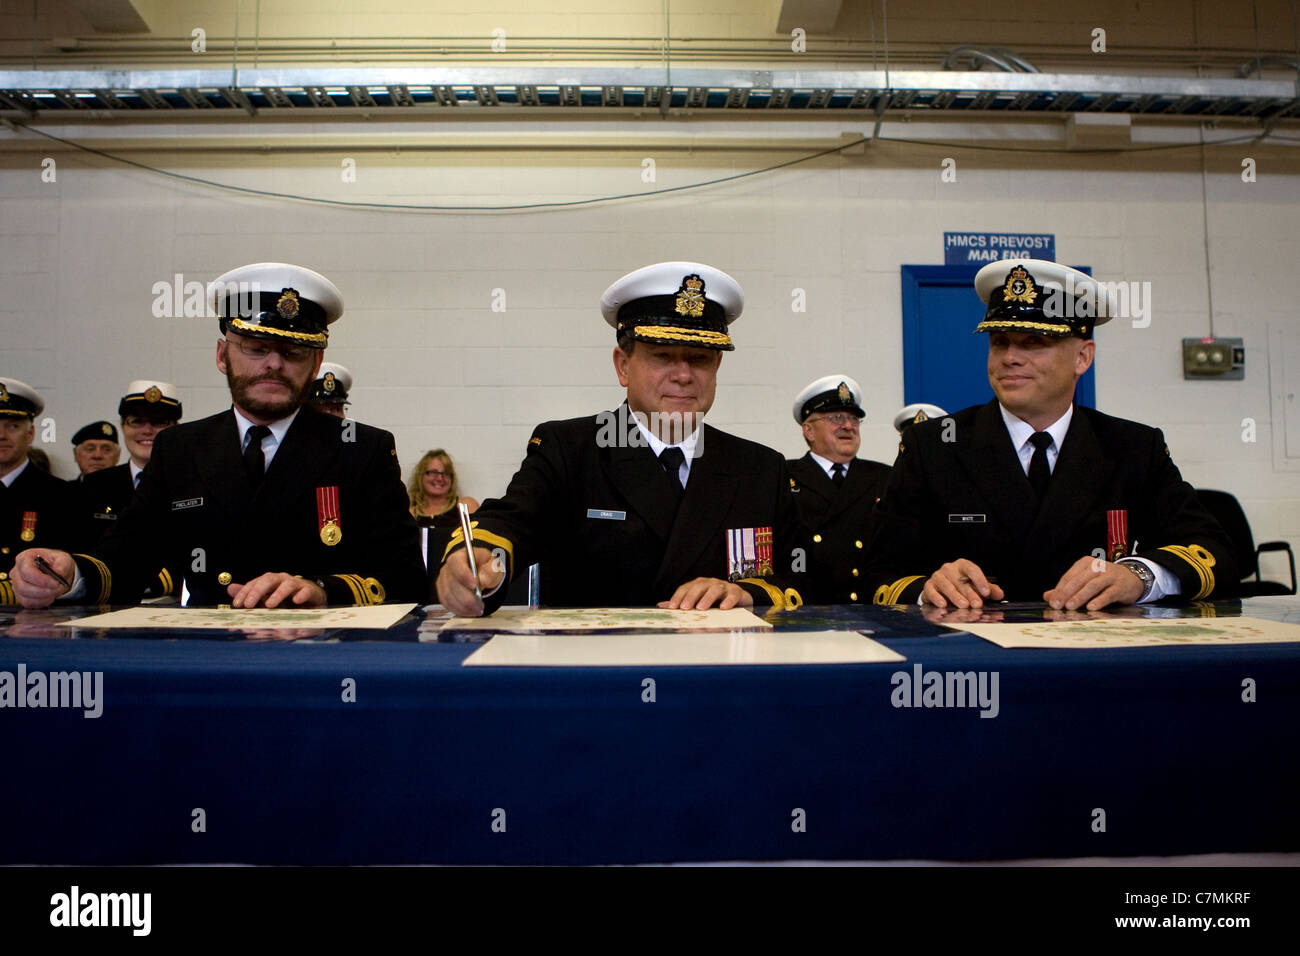 London Ontario, Canada. September 24, 2011. Change of Command ceremony at HMCS Prevost in London, Canada. Stock Photo